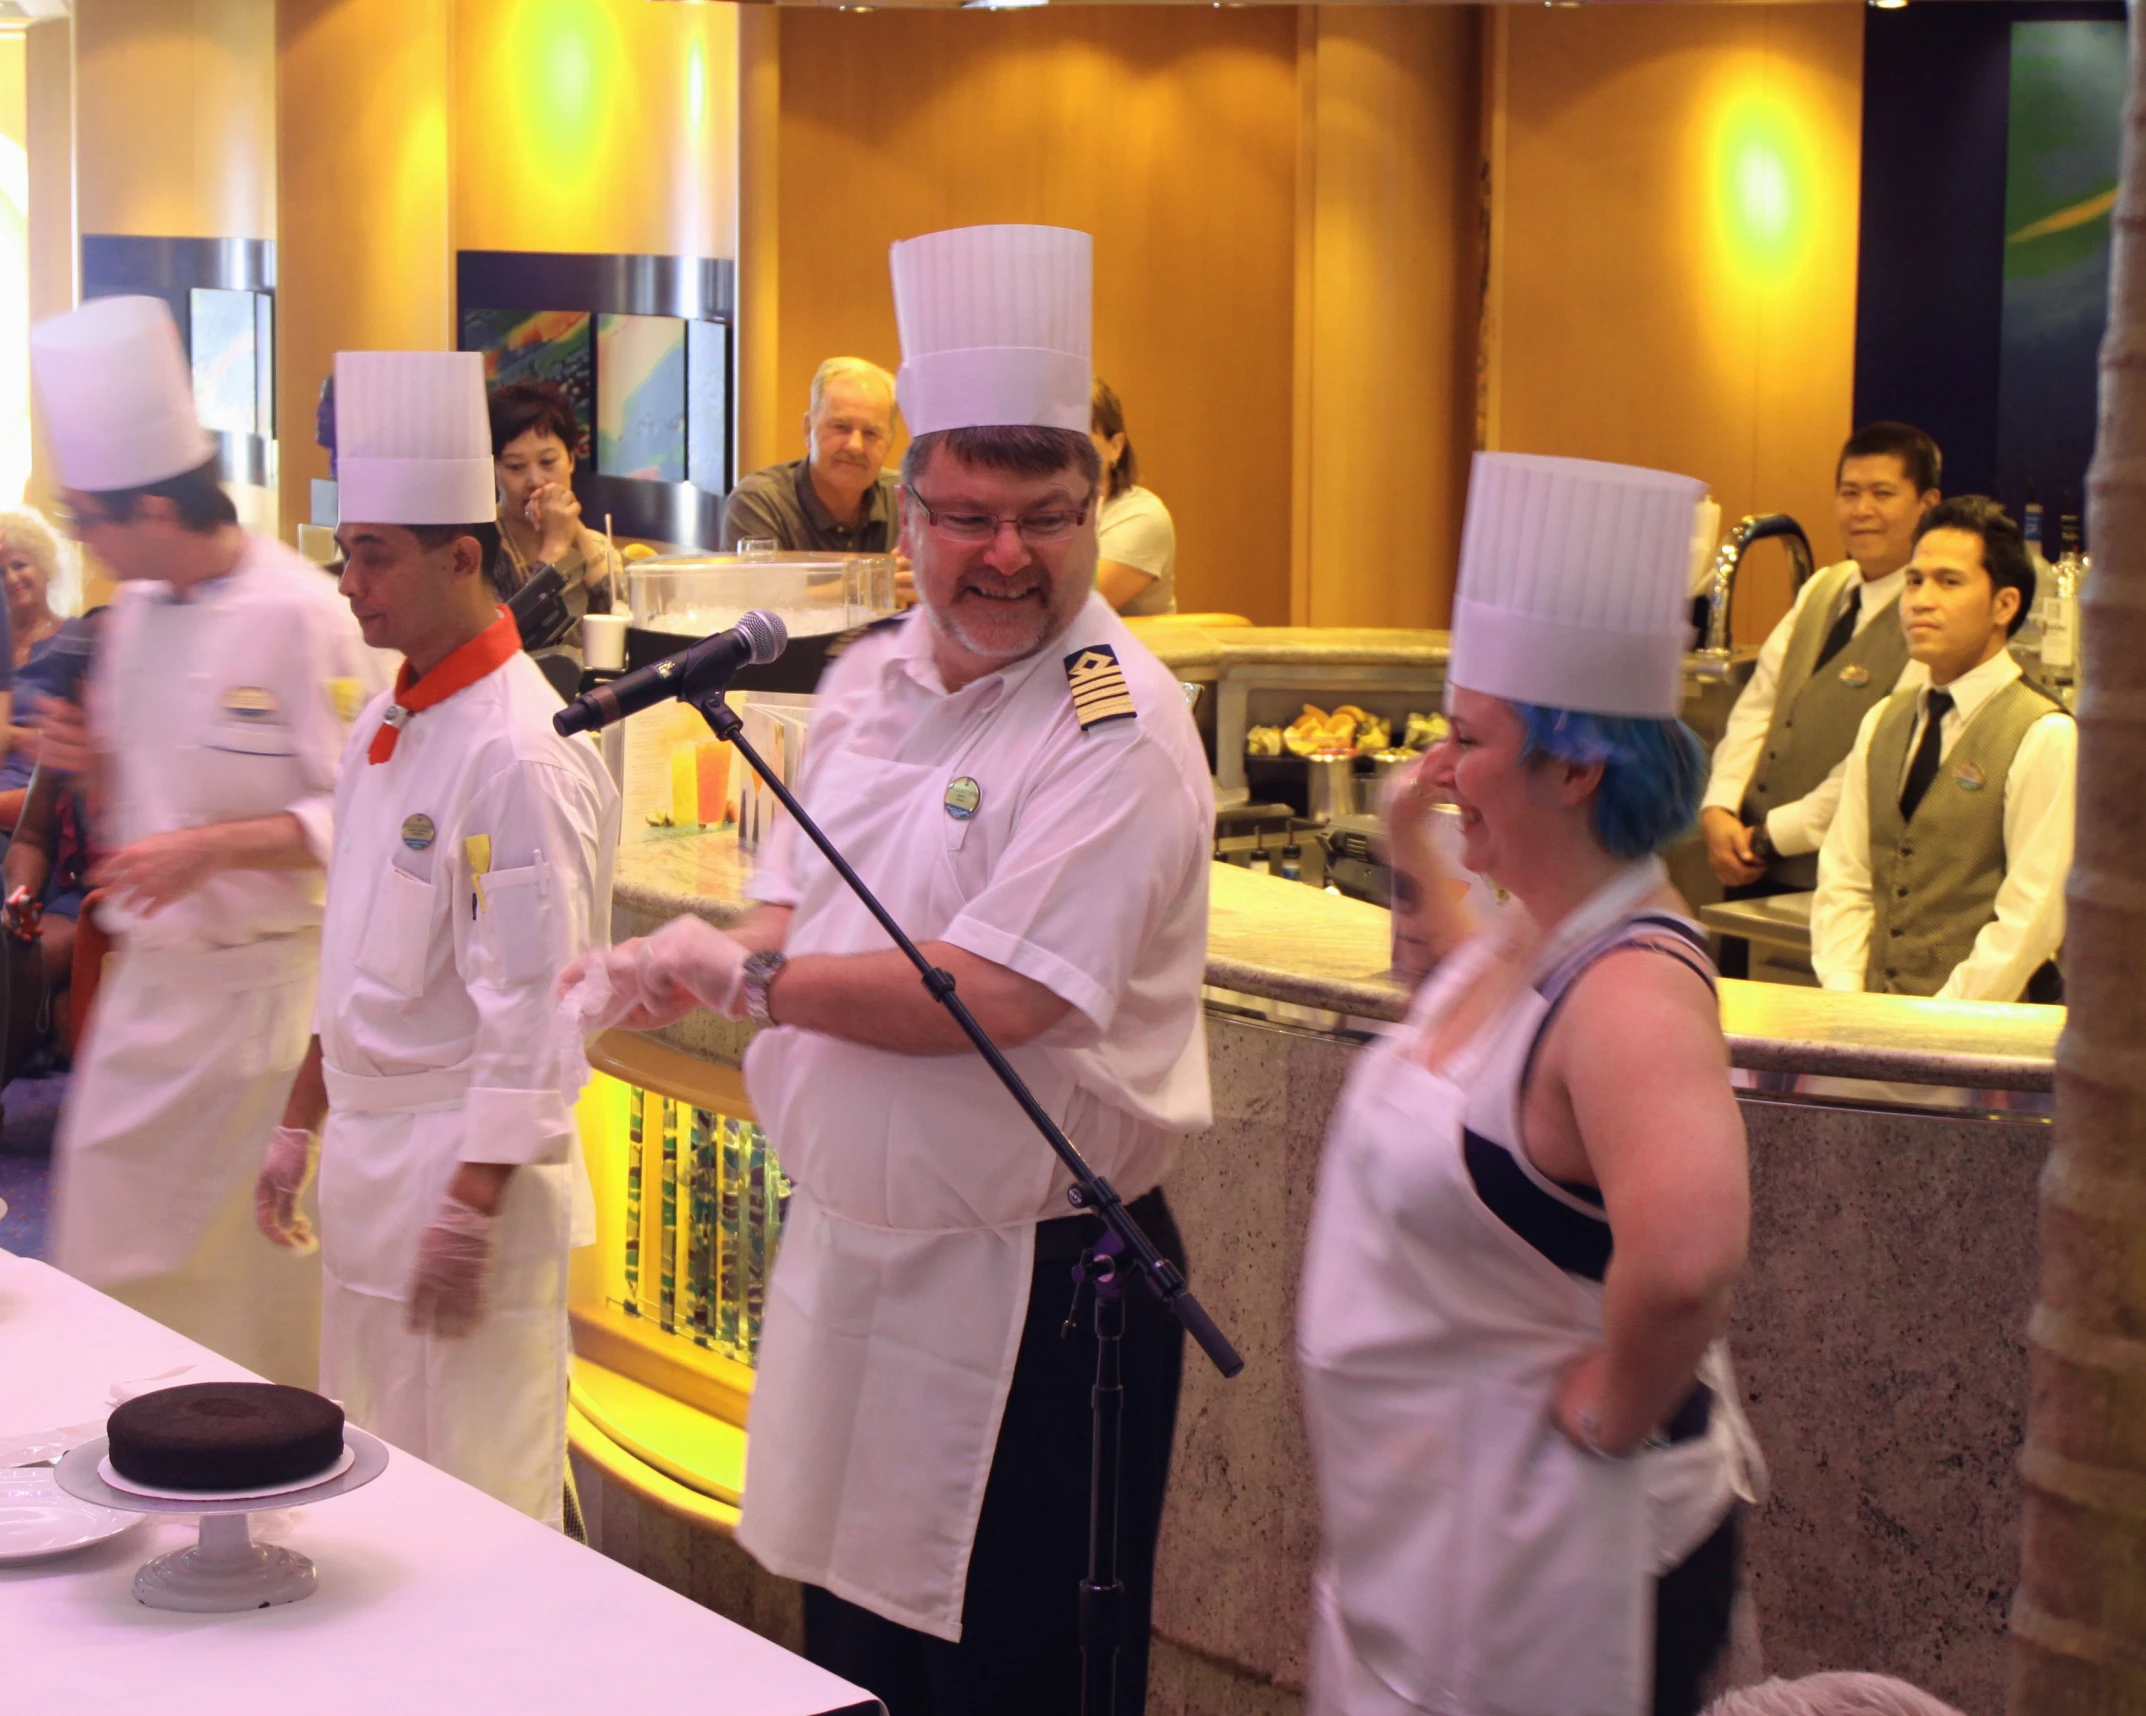 a chef is speaking to people in chefs'hats